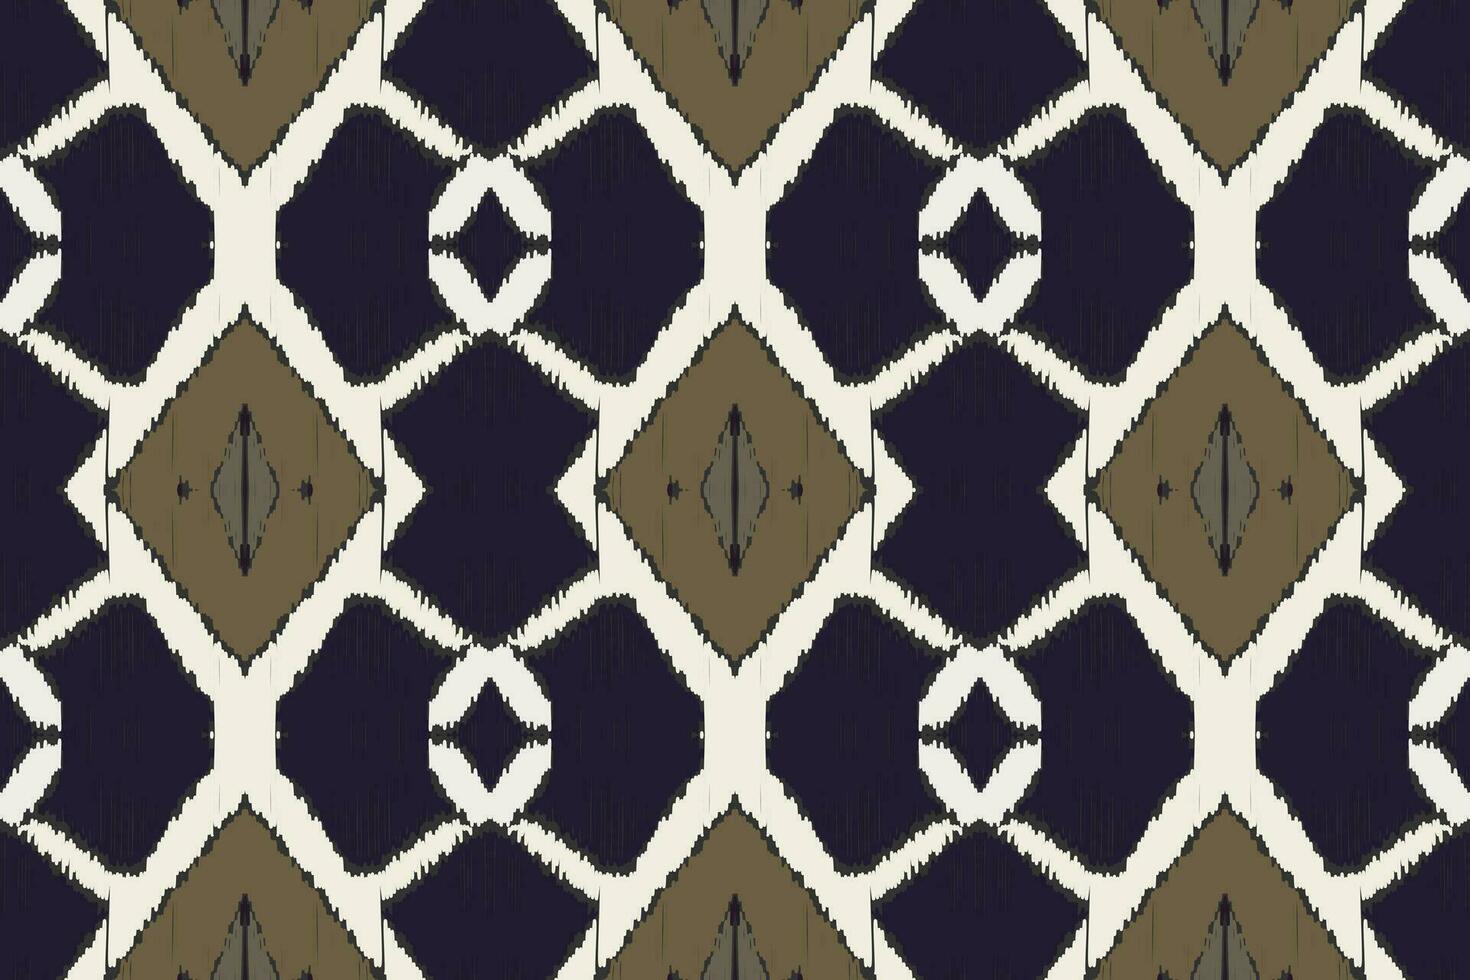 Ikat Damask Paisley Embroidery Background. Ikat Stripe Geometric Ethnic Oriental Pattern traditional.aztec Style Abstract Vector illustration.design for Texture,fabric,clothing,wrapping,sarong.